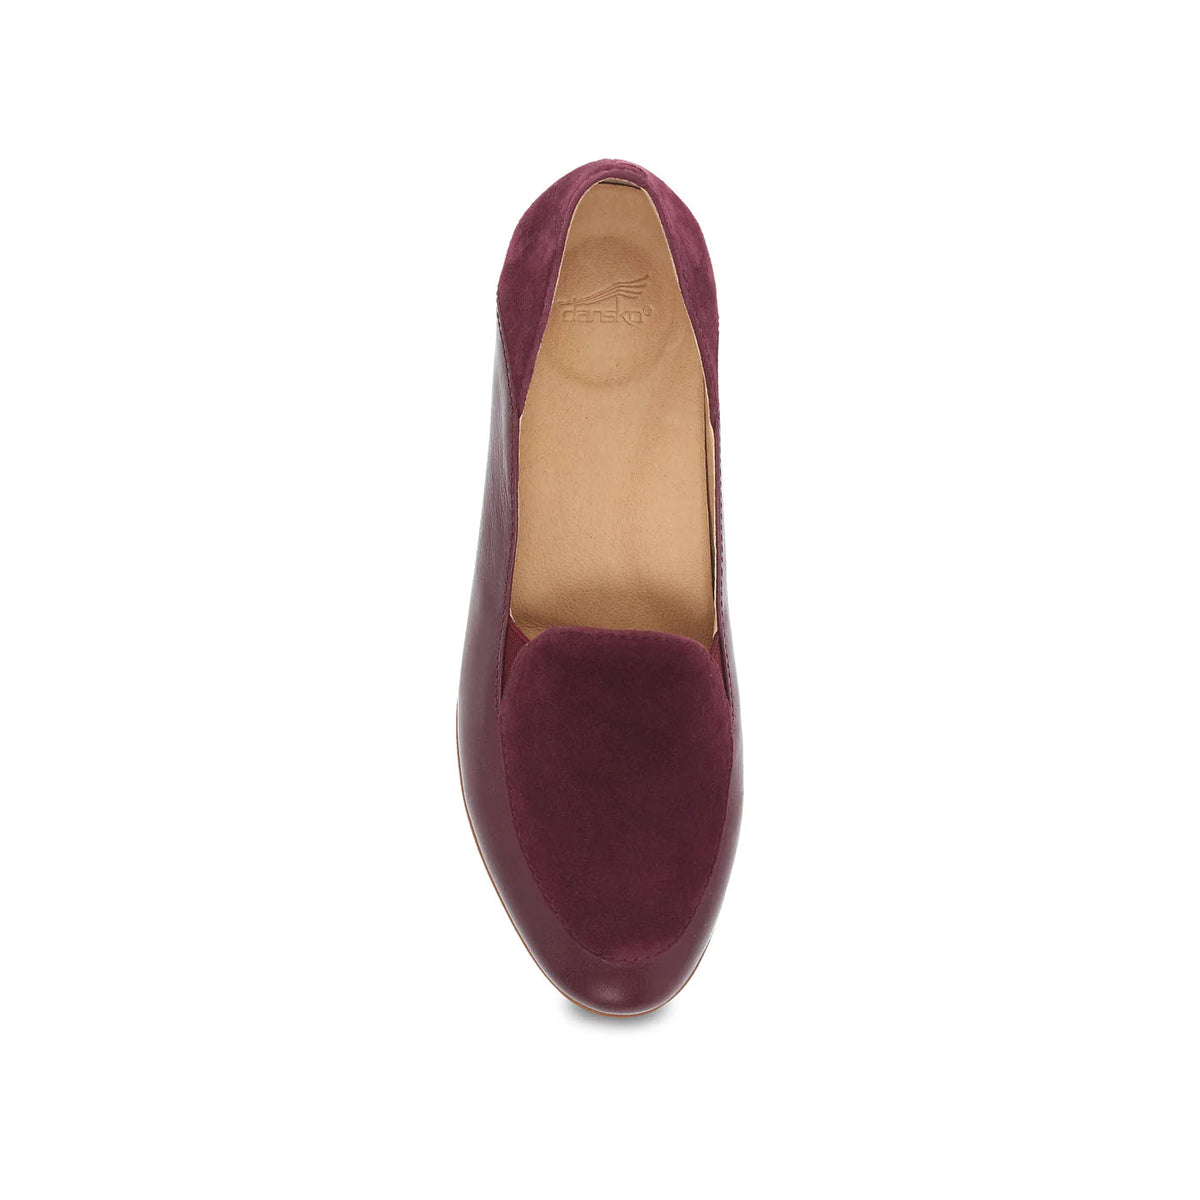 Top view of a single burgundy suede Dansko Lace Wine Glazed loafer on a white background.